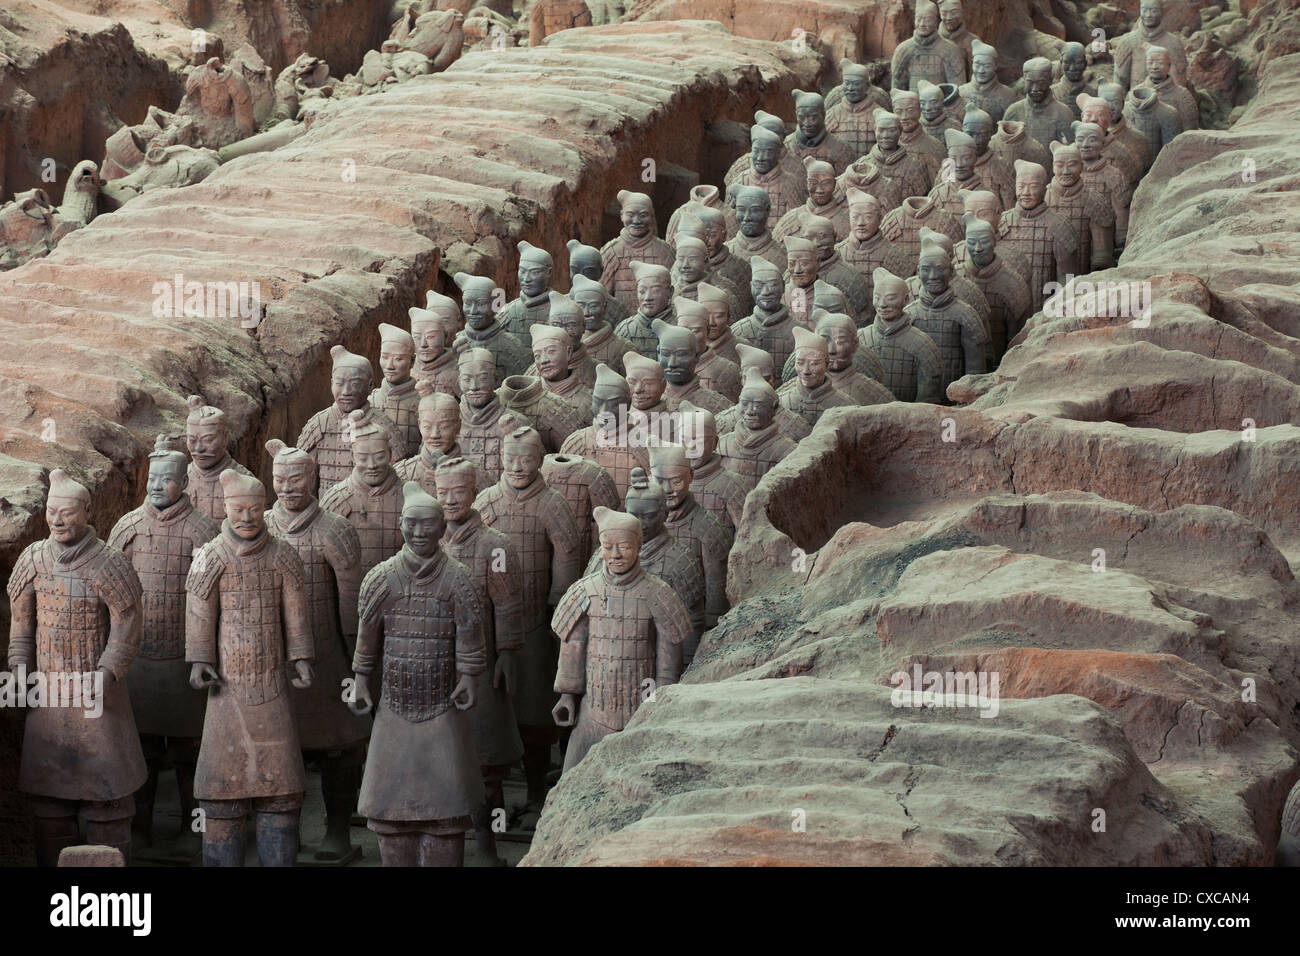 China,sculpture,Protection,Mausoleum,Neat，Indoors, Tomb, samurai,terracotta, ancient civilization,clay,Antiquities,pottery,Army Stock Photo